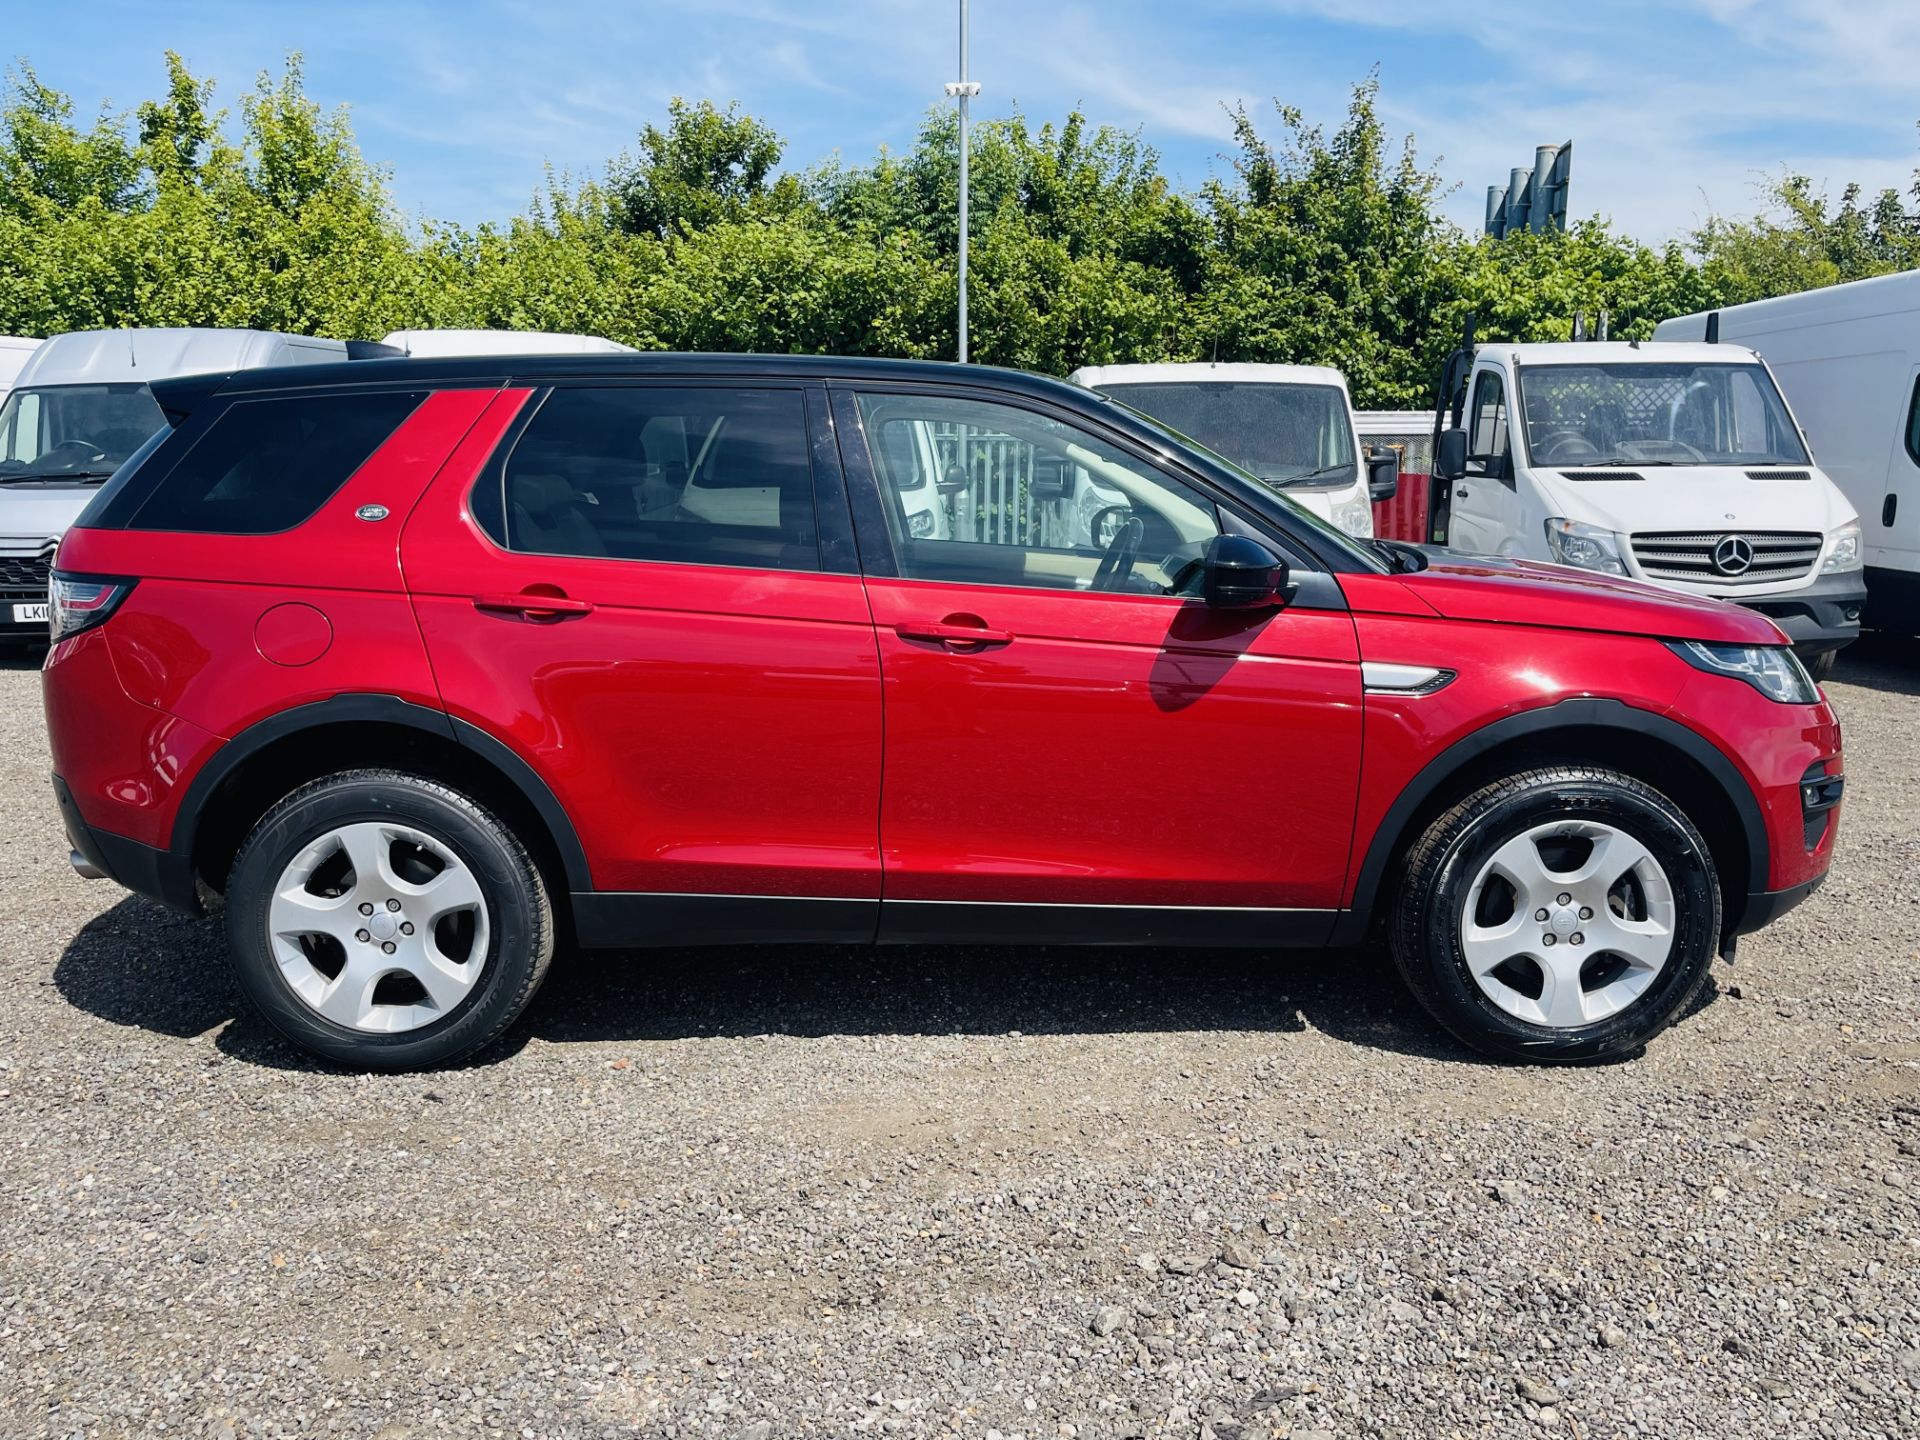 Land Rover Discovery Sport HSE 2.0 ED4 2017 '67 Reg' Sat Nav - Panoramic Glass Roof - ULEZ Compliant - Image 14 of 33